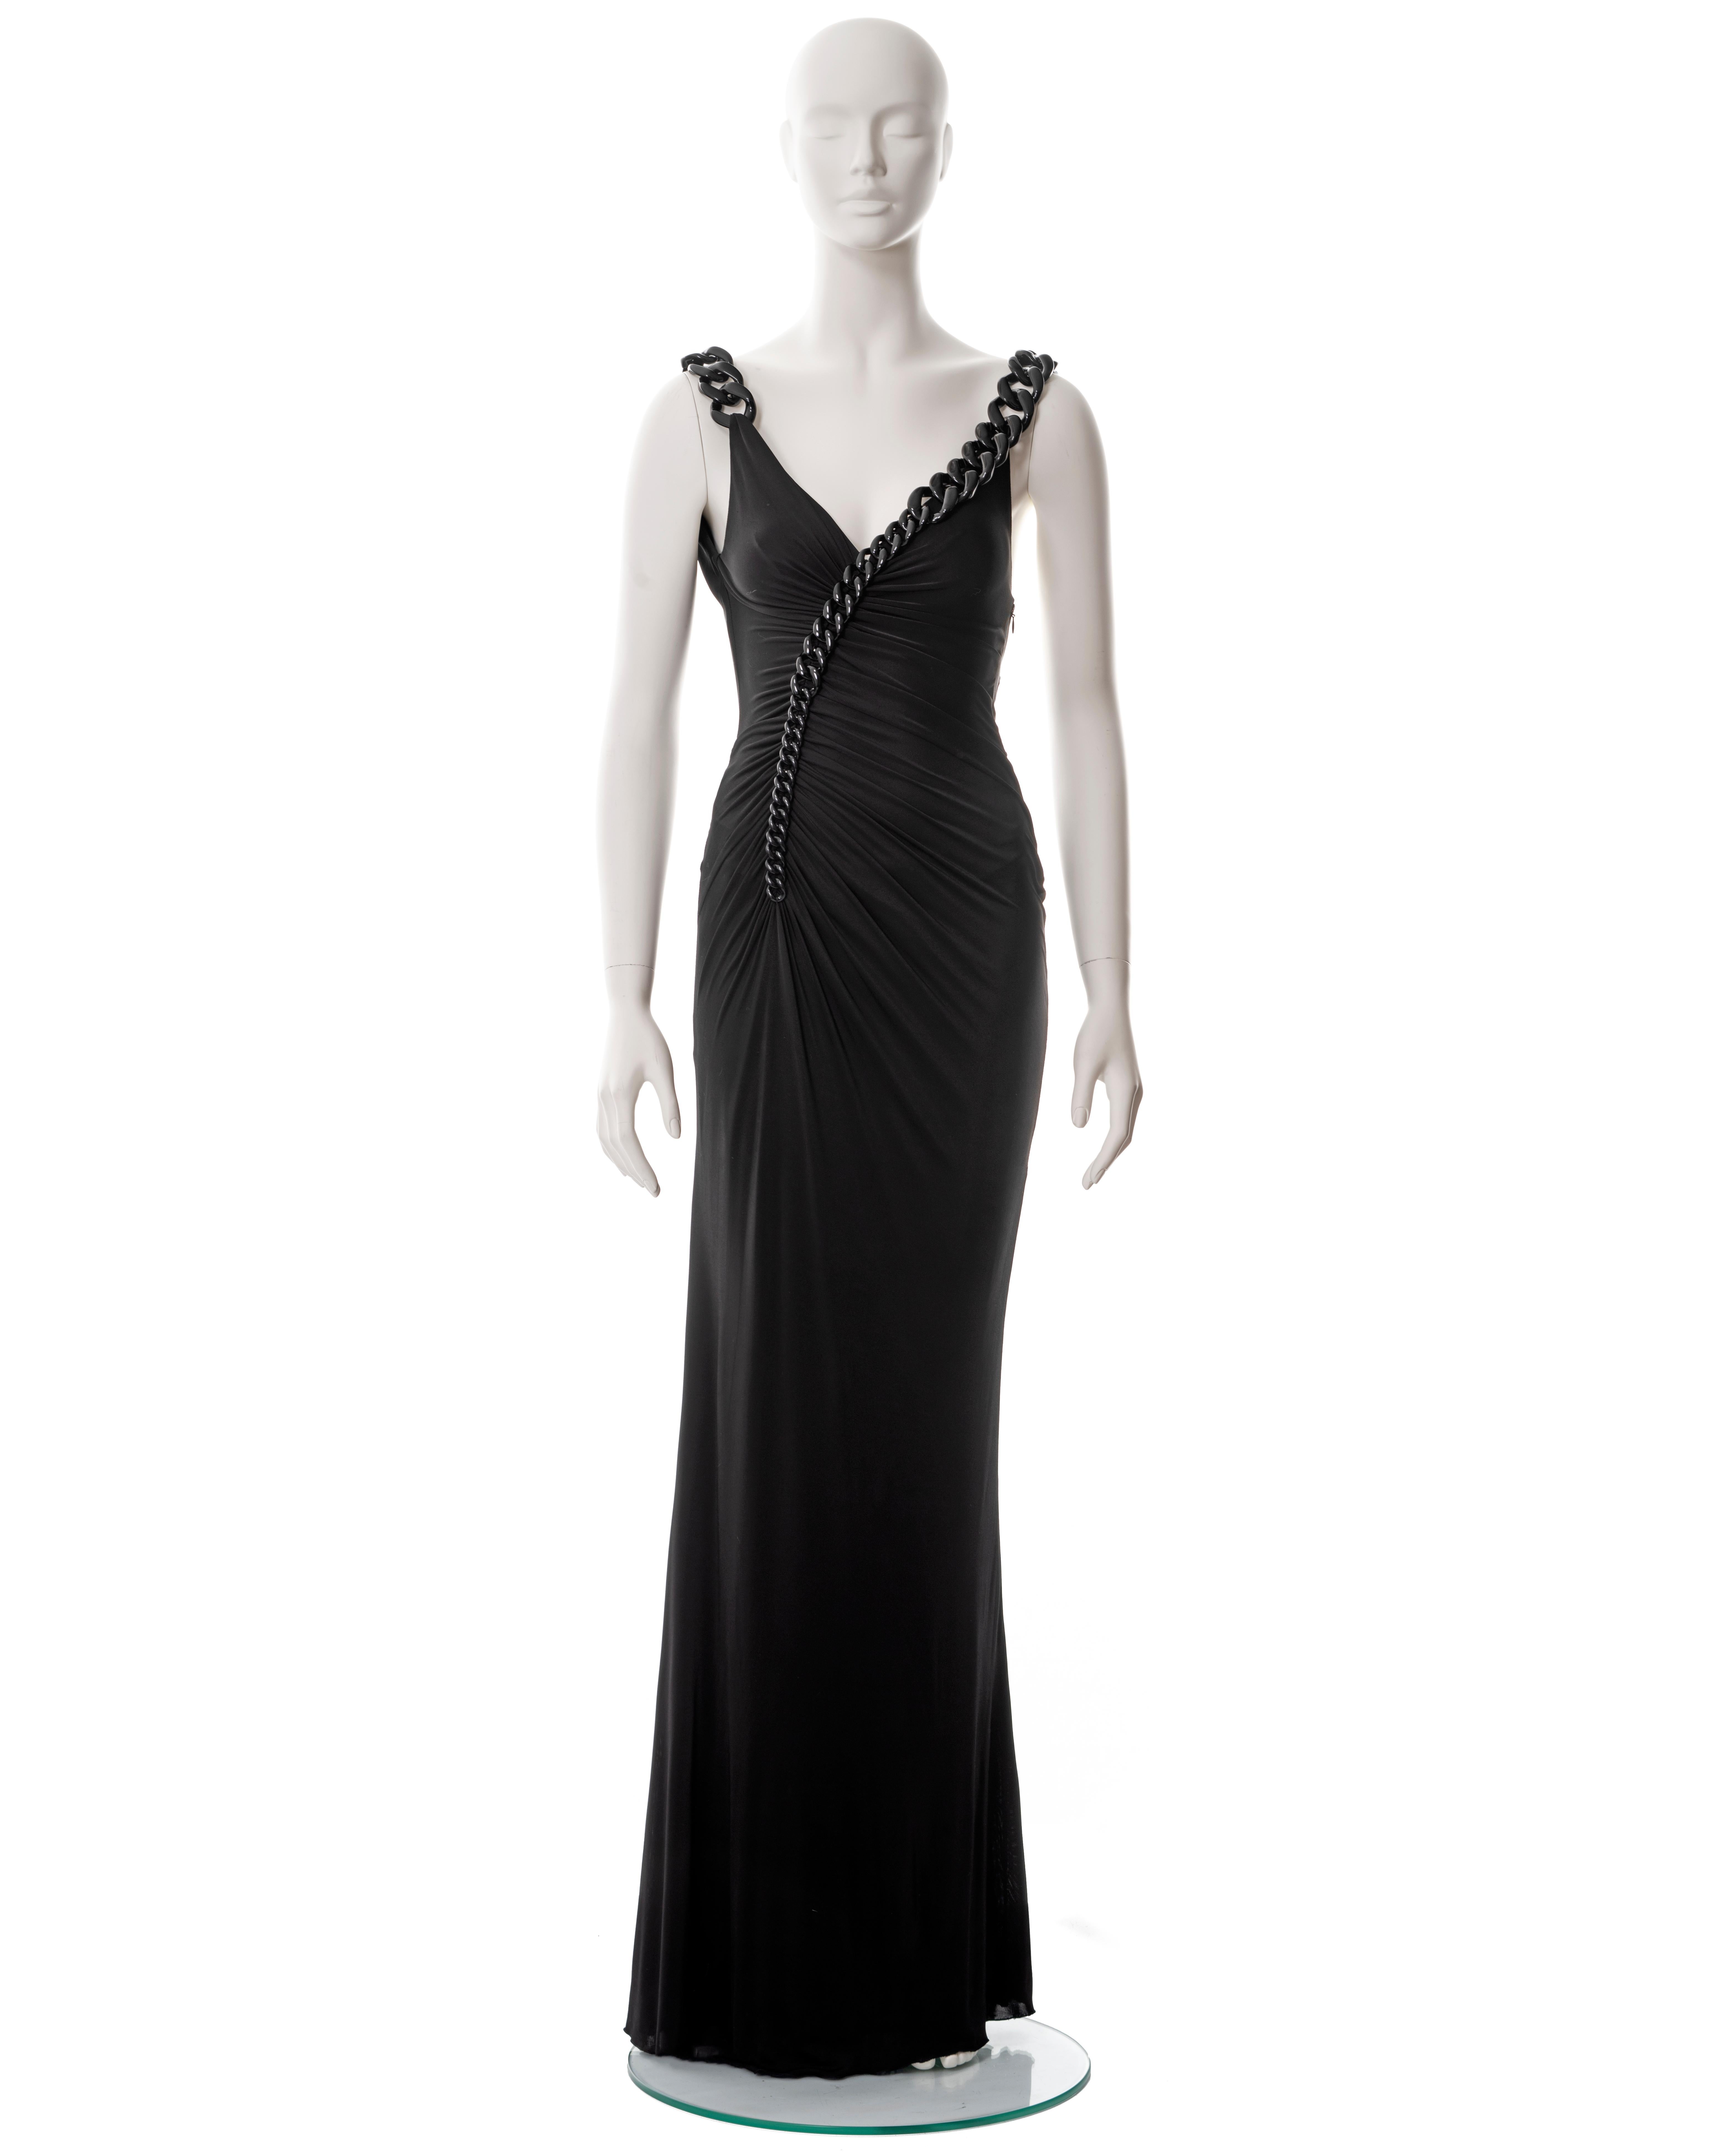 ▪ Versace black evening dress
▪ Sold by One of a Kind Archive
▪ Glossy black acrylic chain shoulder straps 
▪ Ruched bodice 
▪ Floor-length skirt 
▪ Built-in bodysuit
▪ IT 38 - FR 34 - UK 6
▪ Made in Italy

All photographs in this listing EXCLUDING